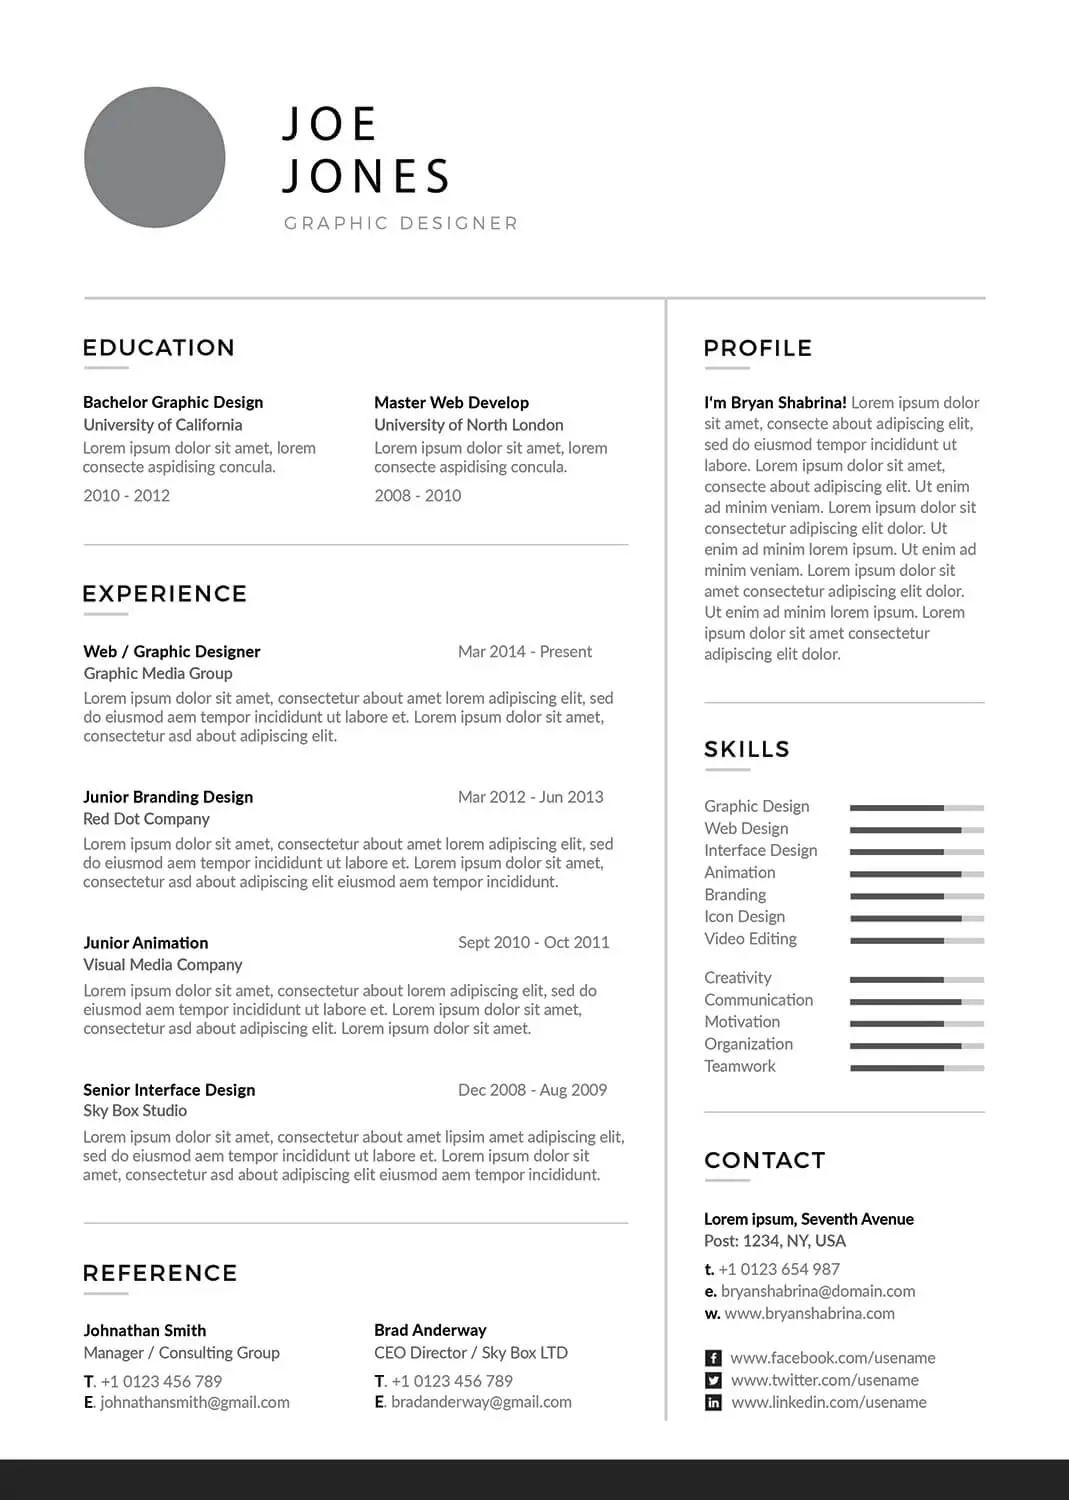 Content Acquisitions Director Resume Templates